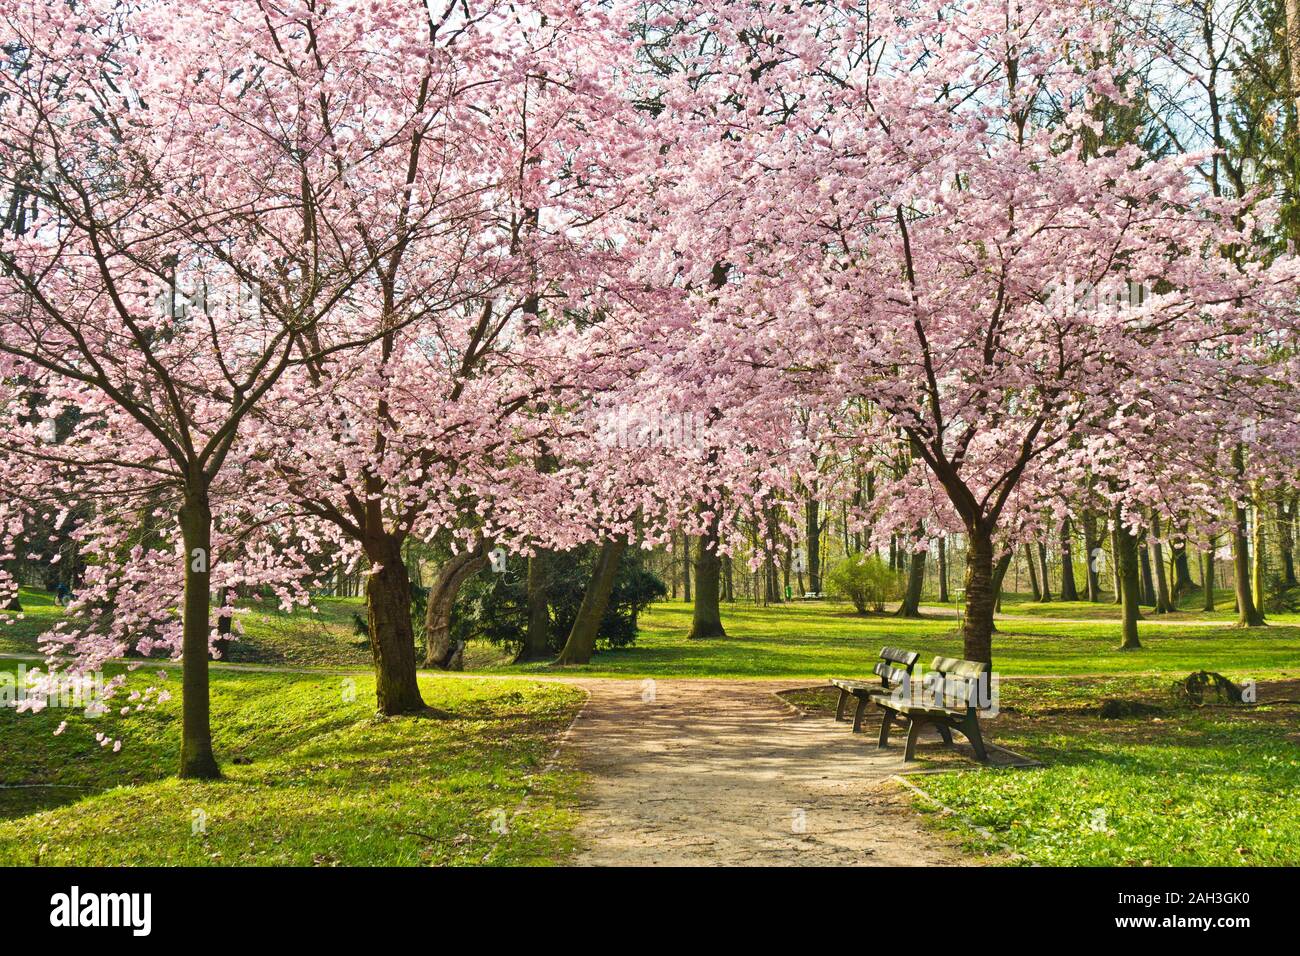 Cherry trees with pink flowers blooming Stock Photo